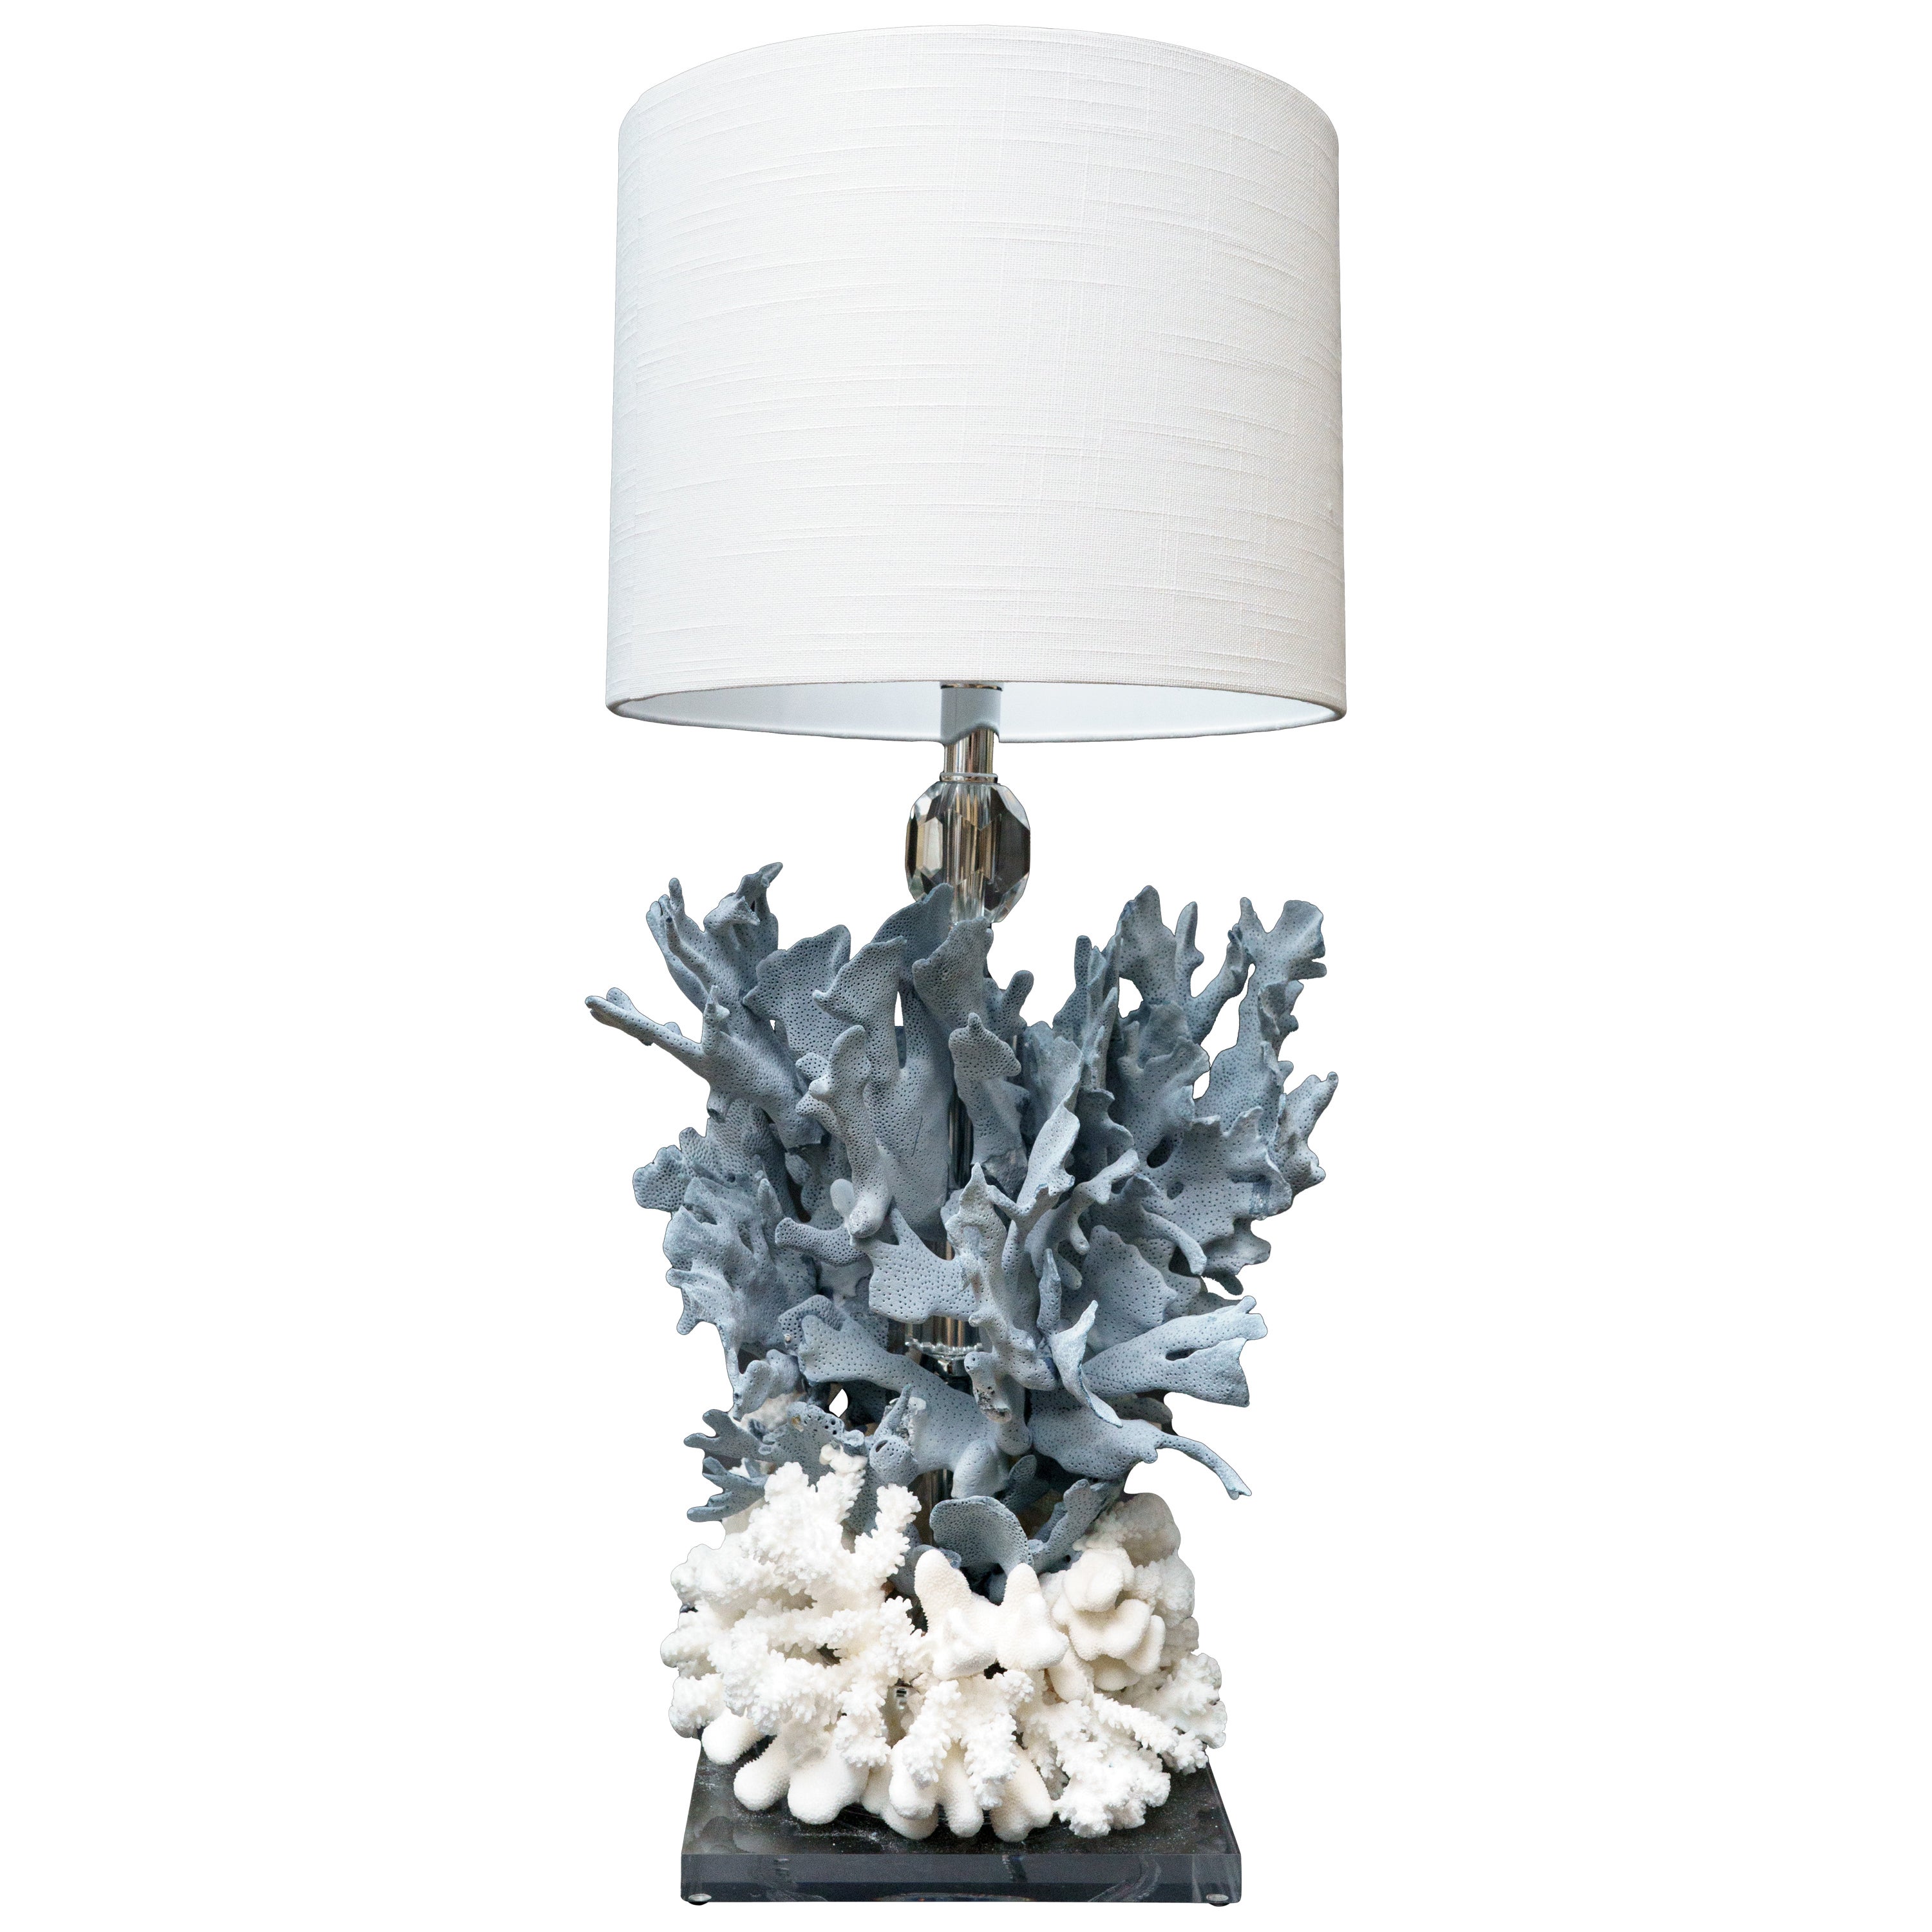 Blue Coral Creation Lamp For Sale